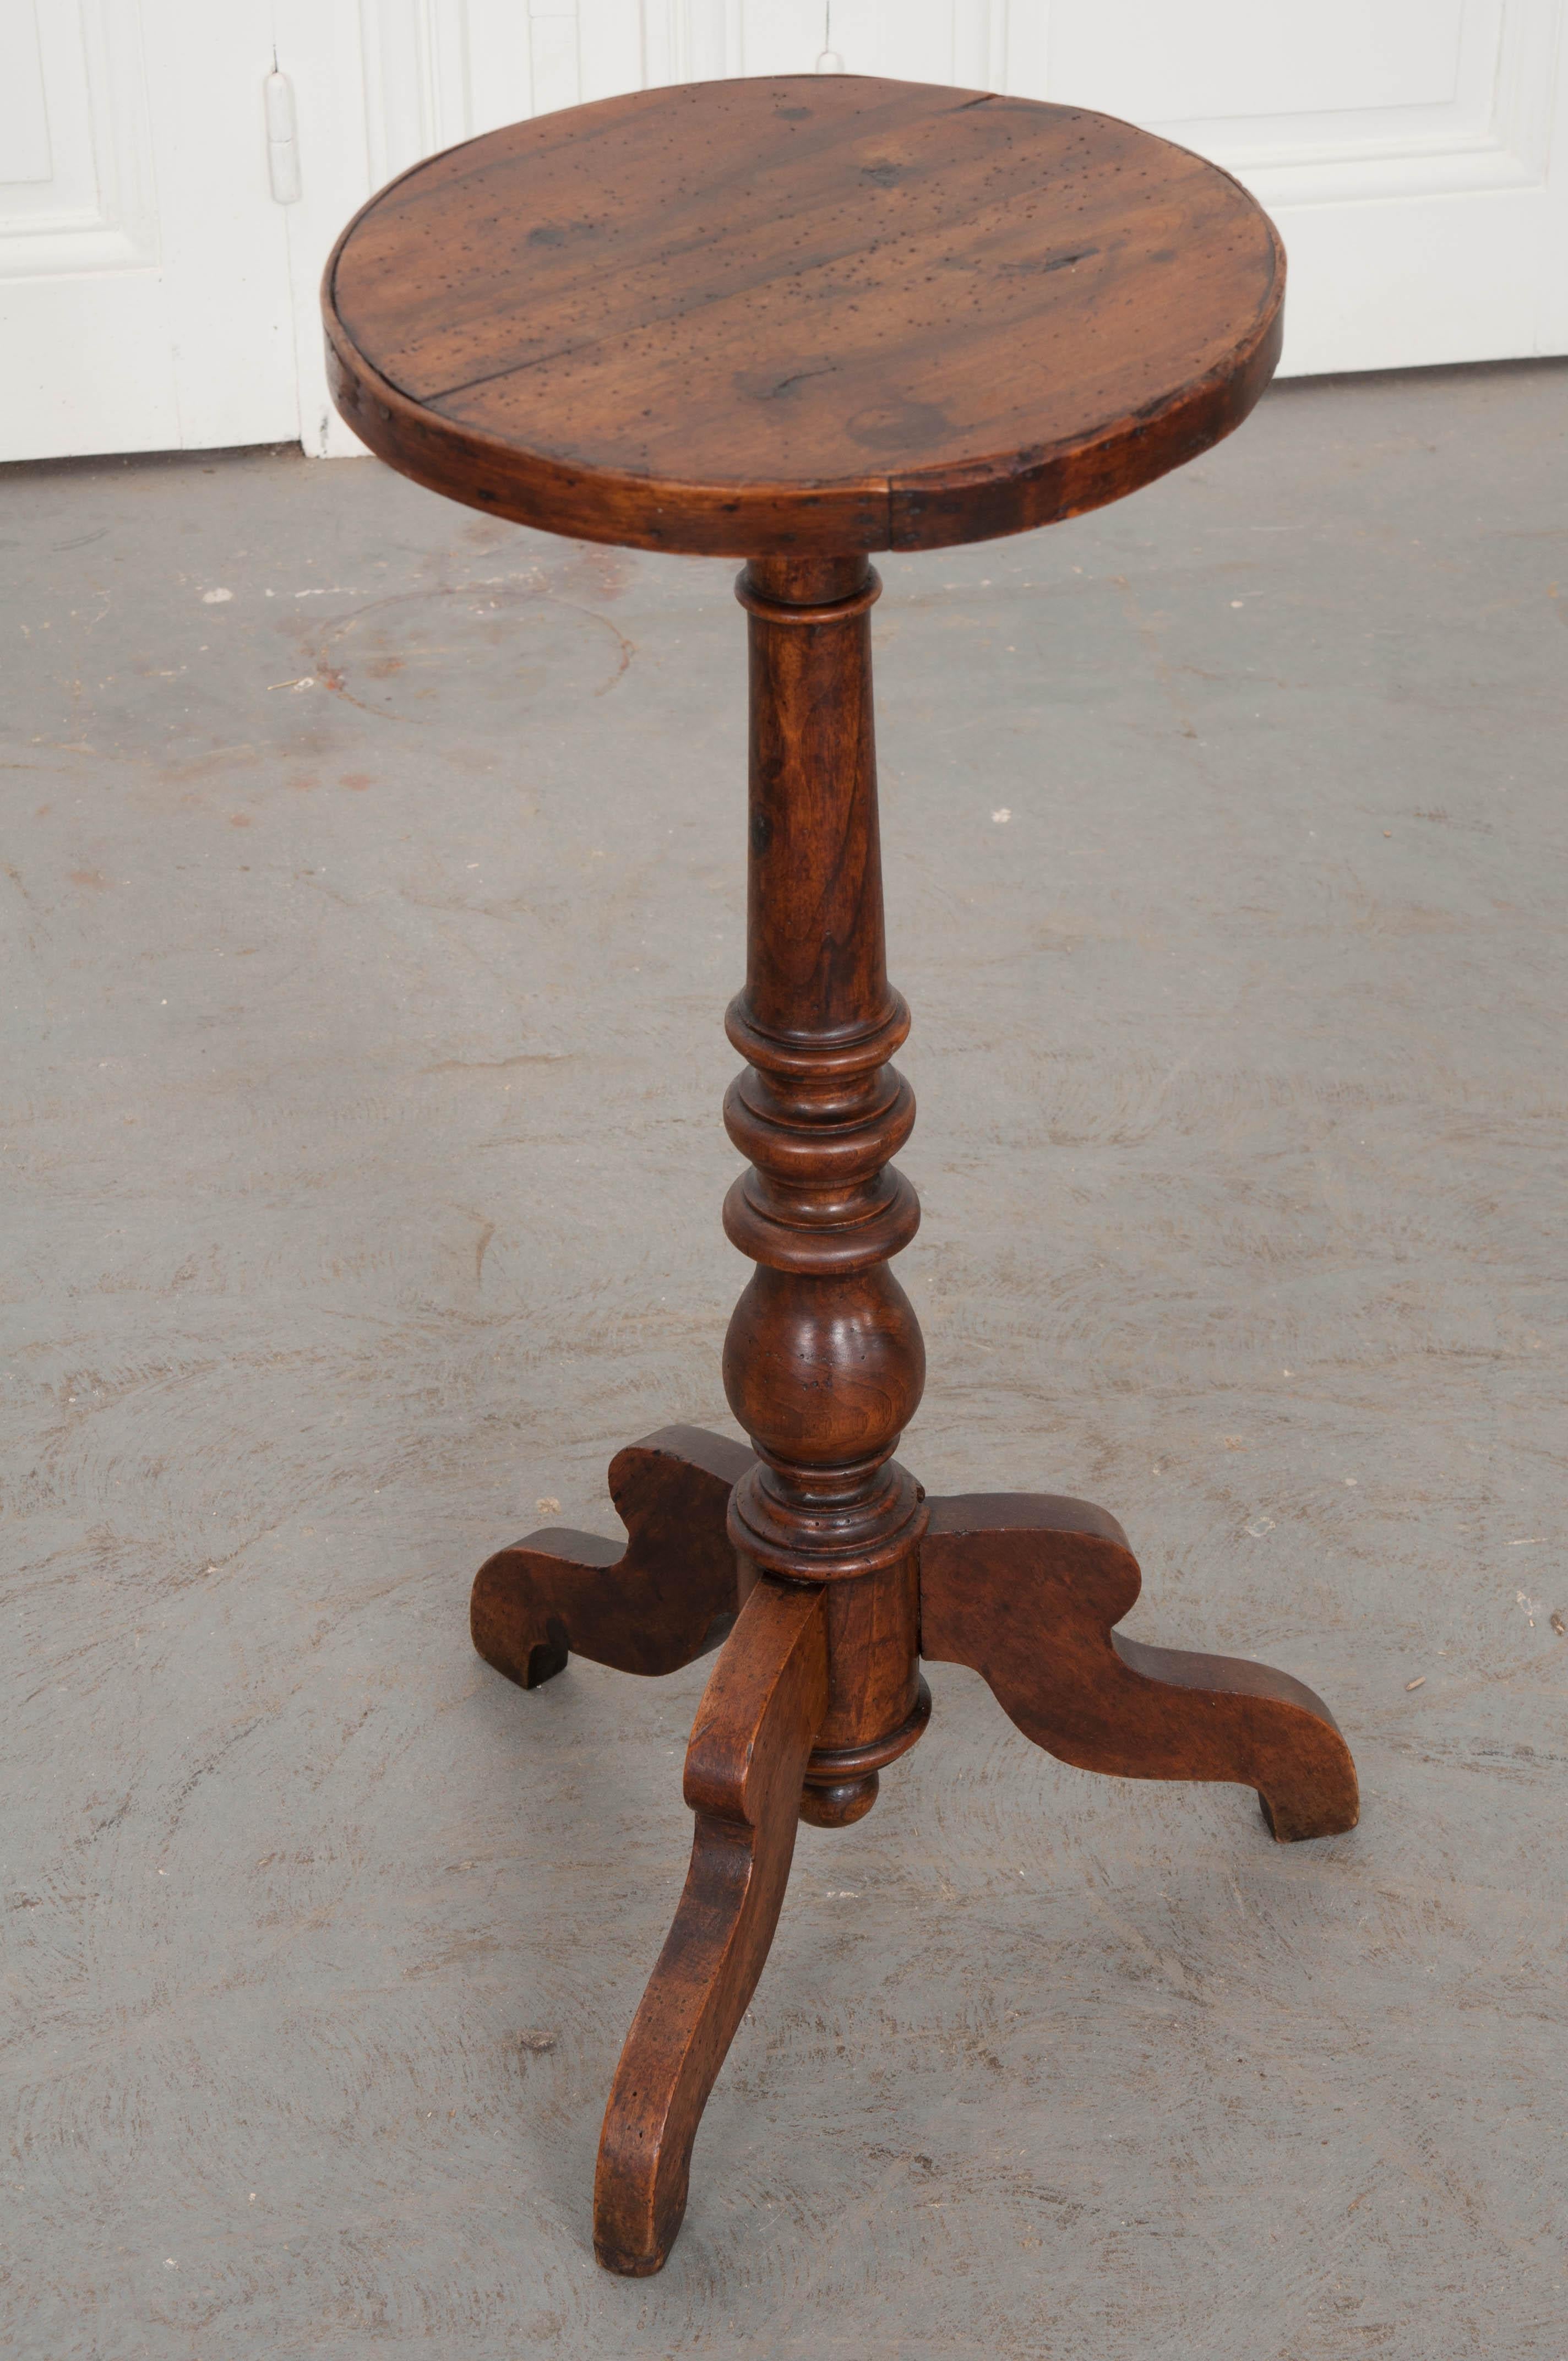 A darling round, walnut table from France. Made at the end of the 19th century, this quaint little table has loads of charm. The small circular top is finished with a wood trim band. The central support is made of turned walnut, fashioned like a